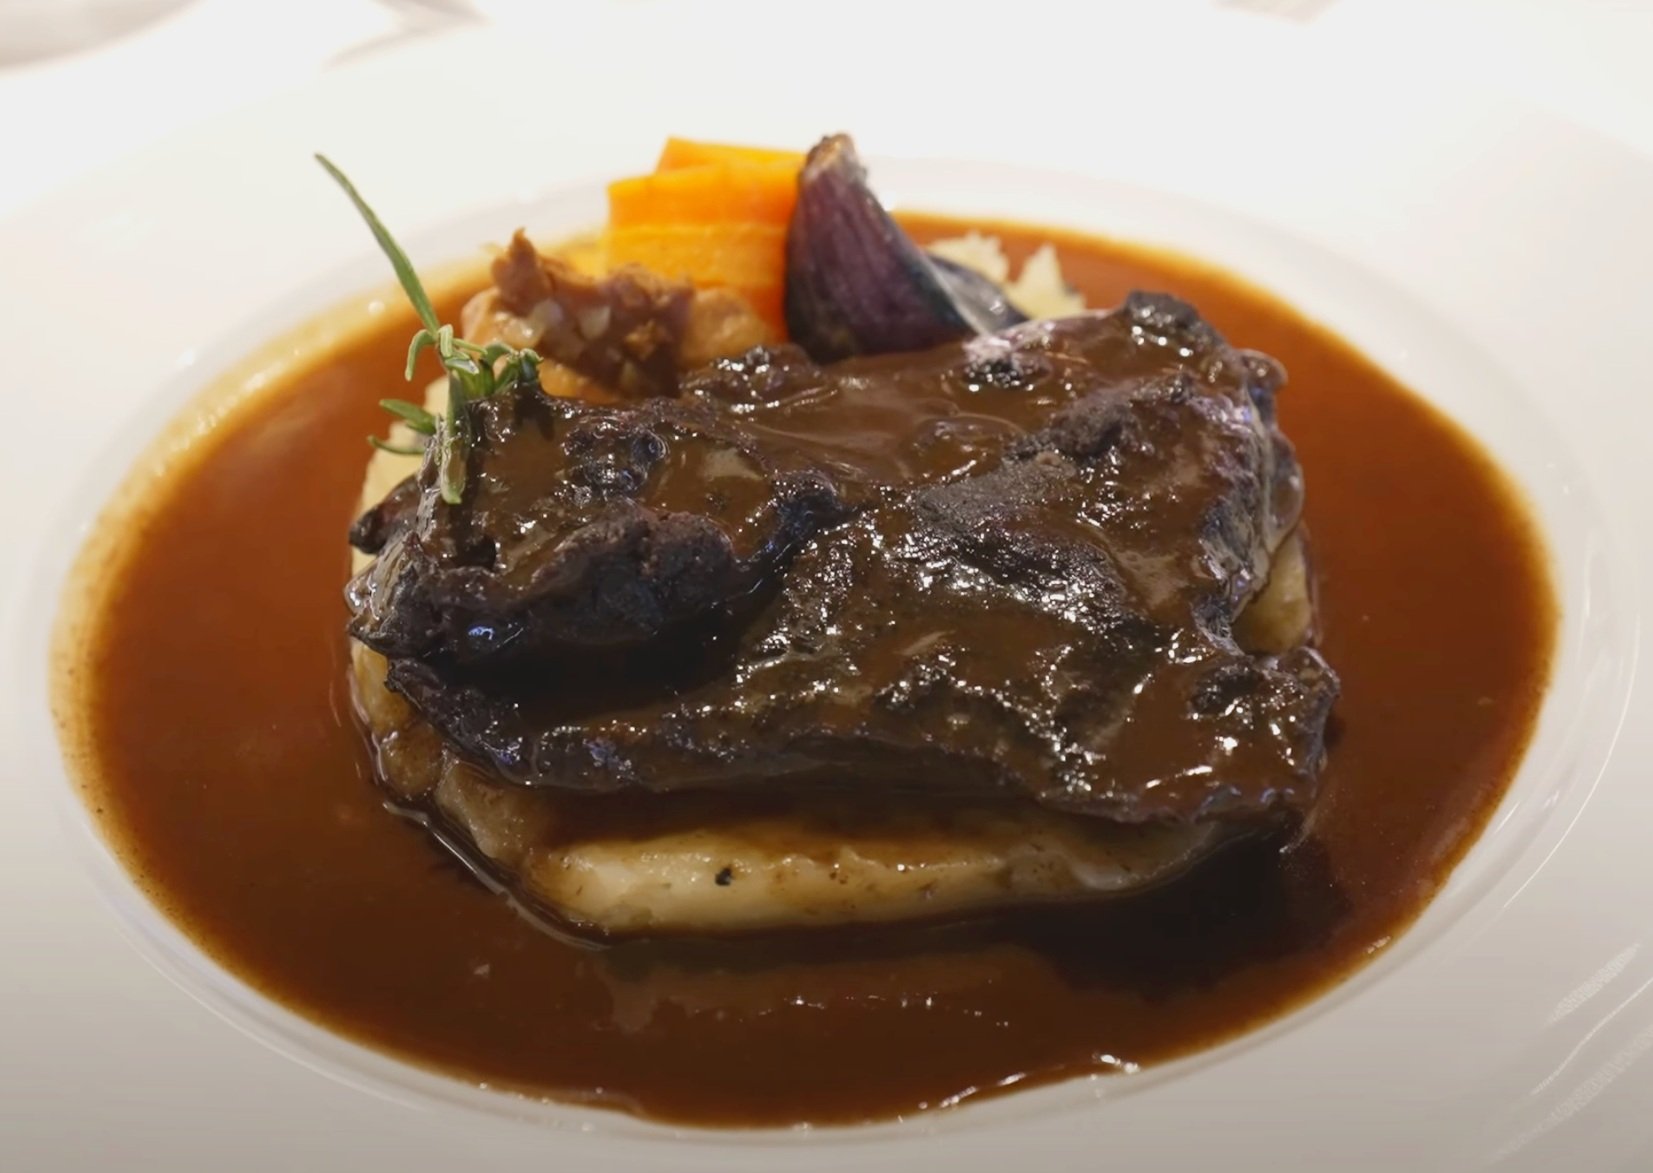  The main course - Bourguignon beef cheek on crushed potato with truffle 